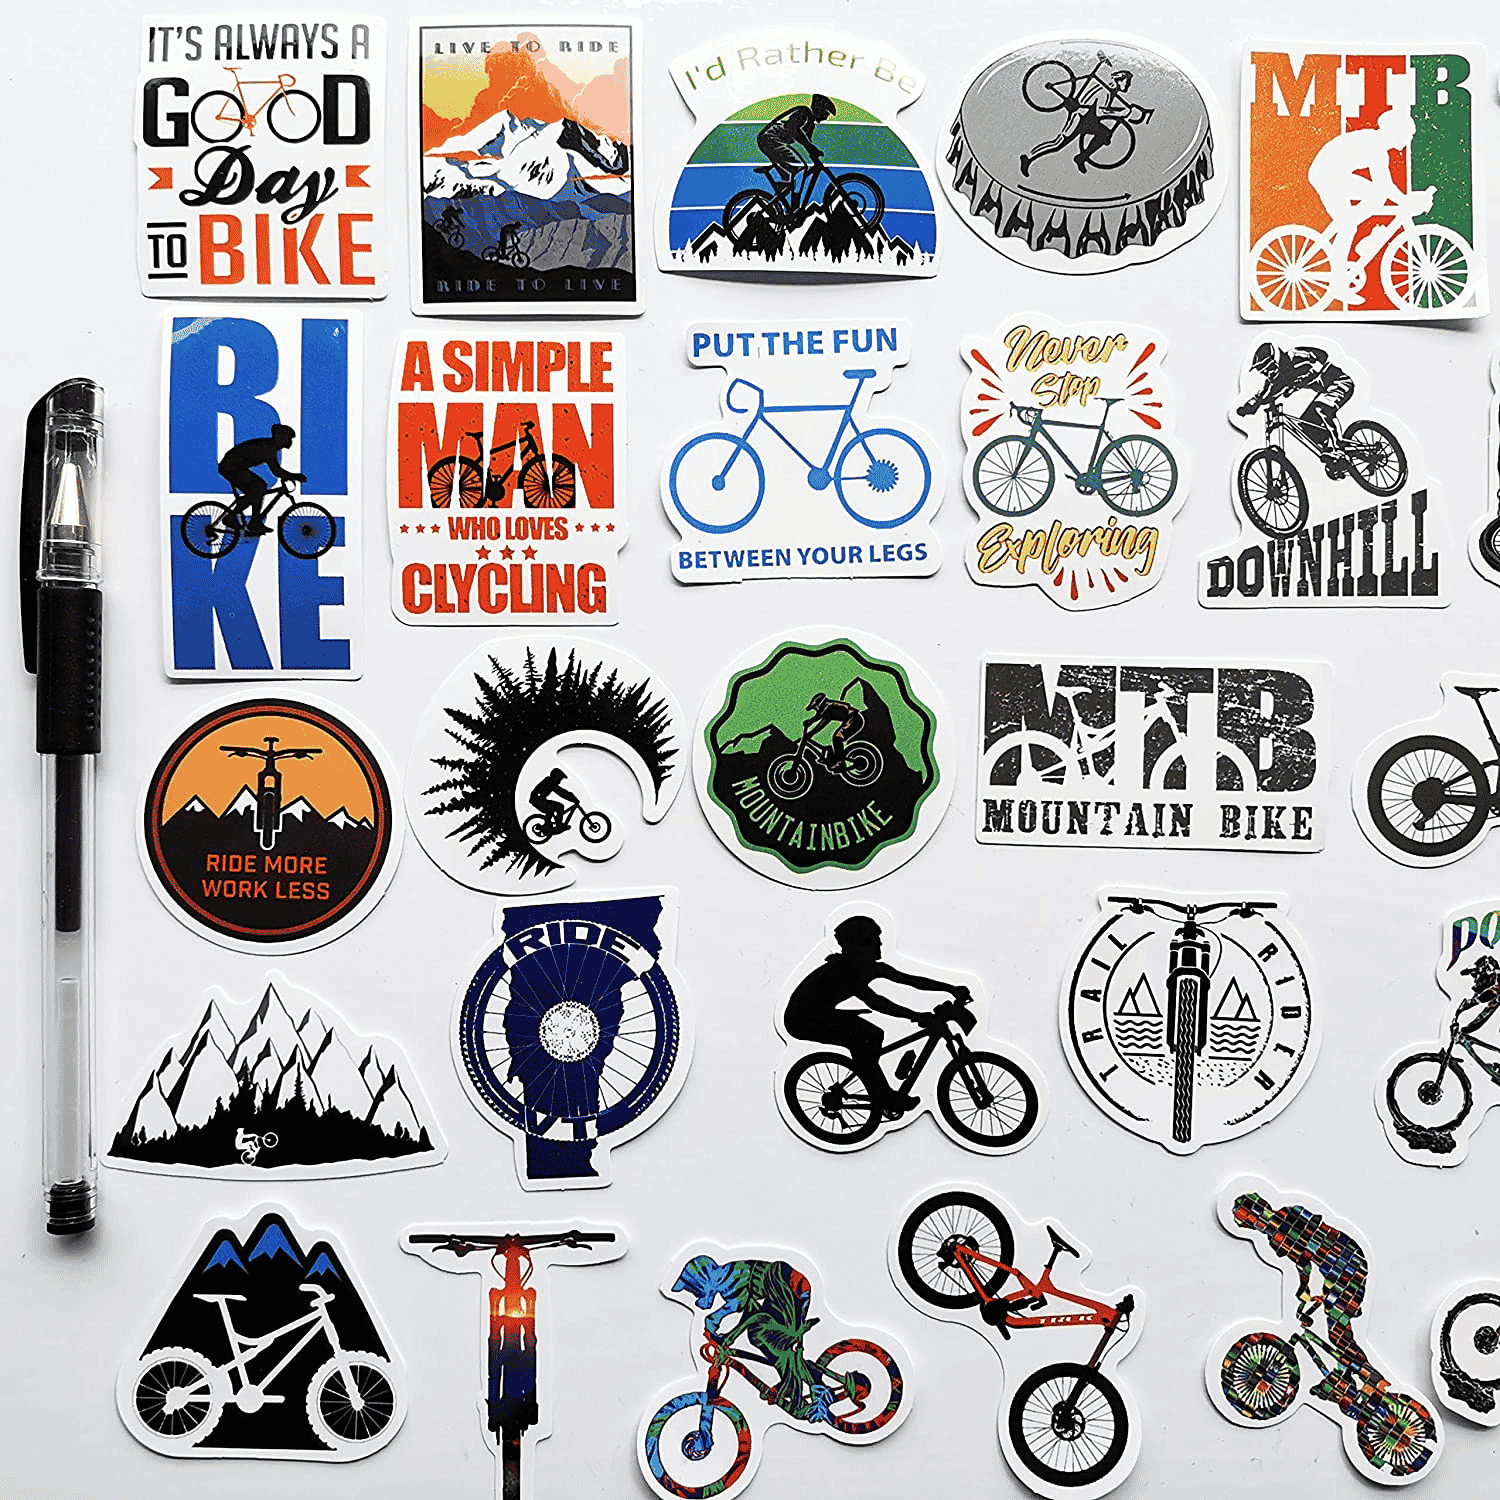 Use these fun stickers to brighten up your mudguards.